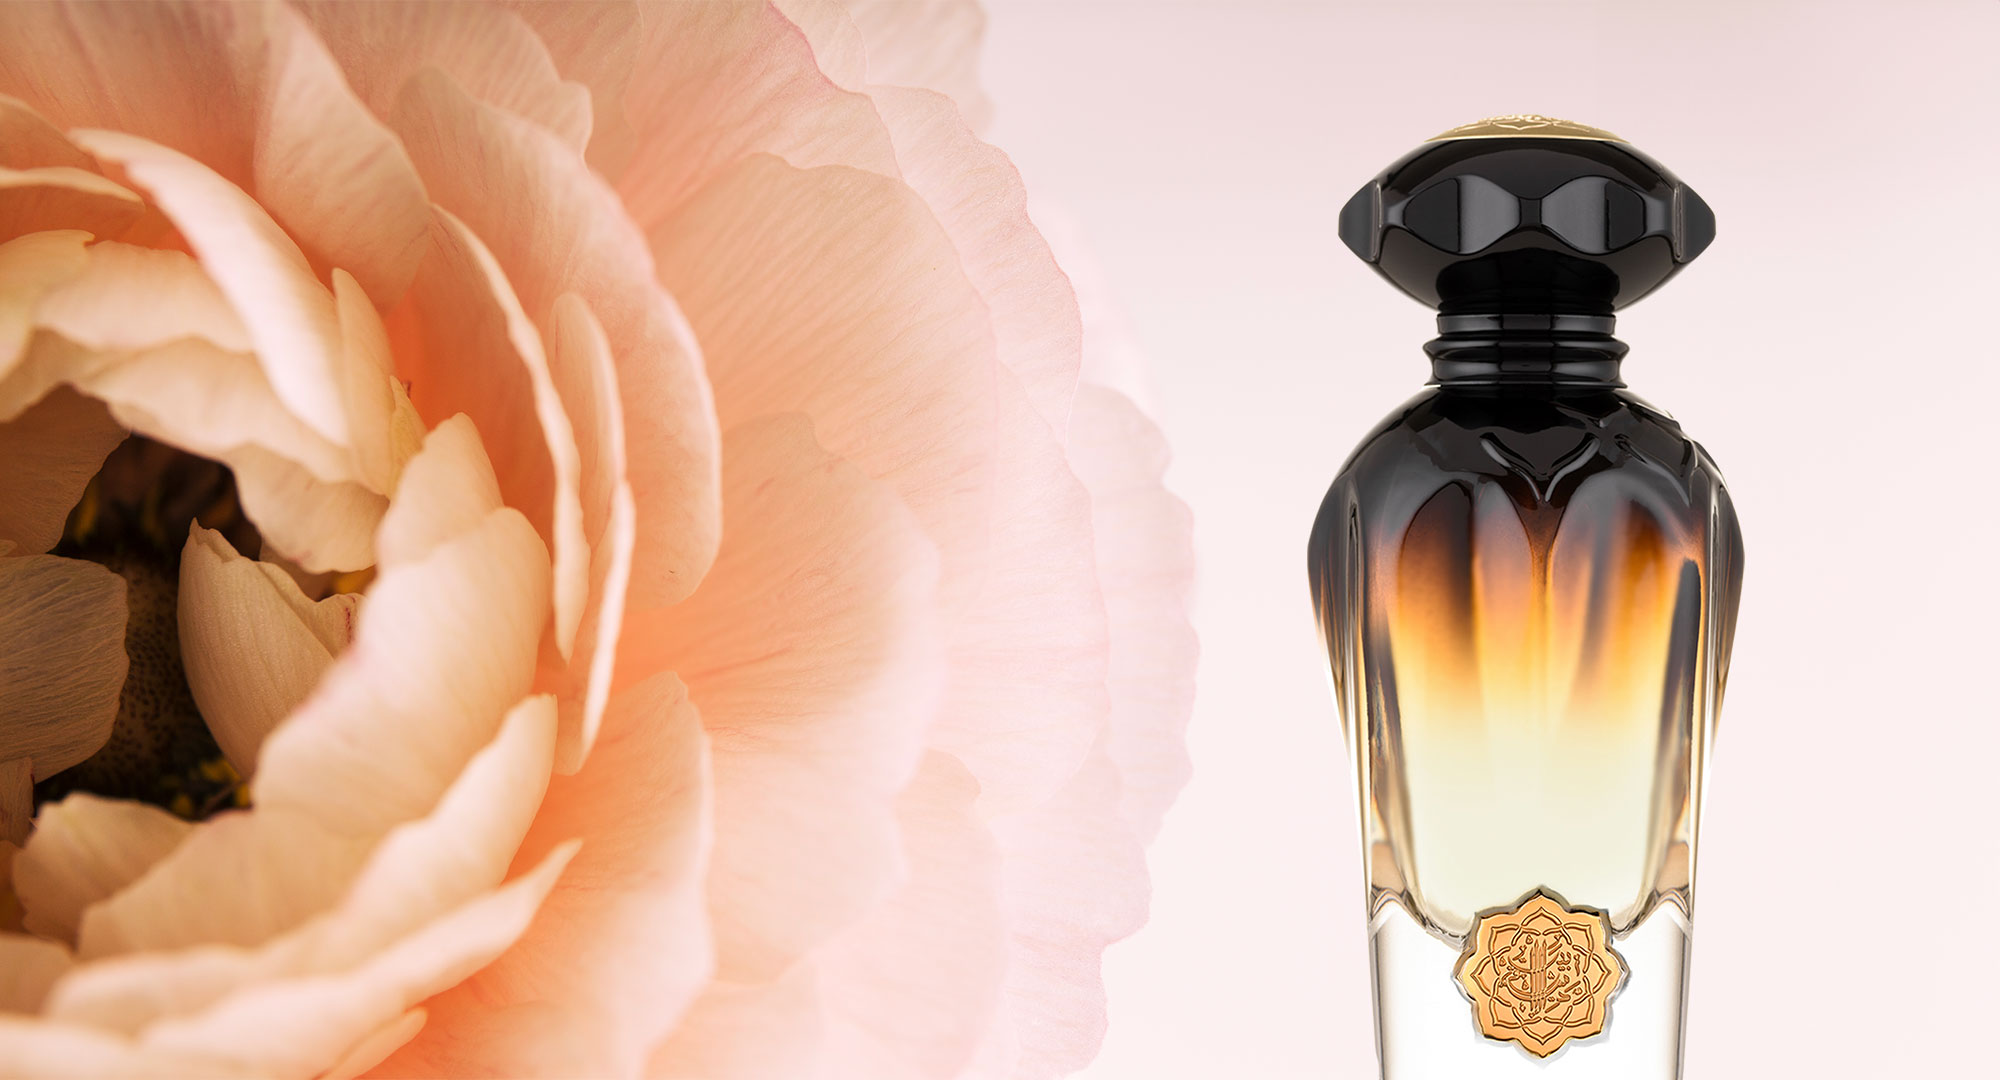 Romantic Evenings: Light Floral Perfumes to Set the Mood